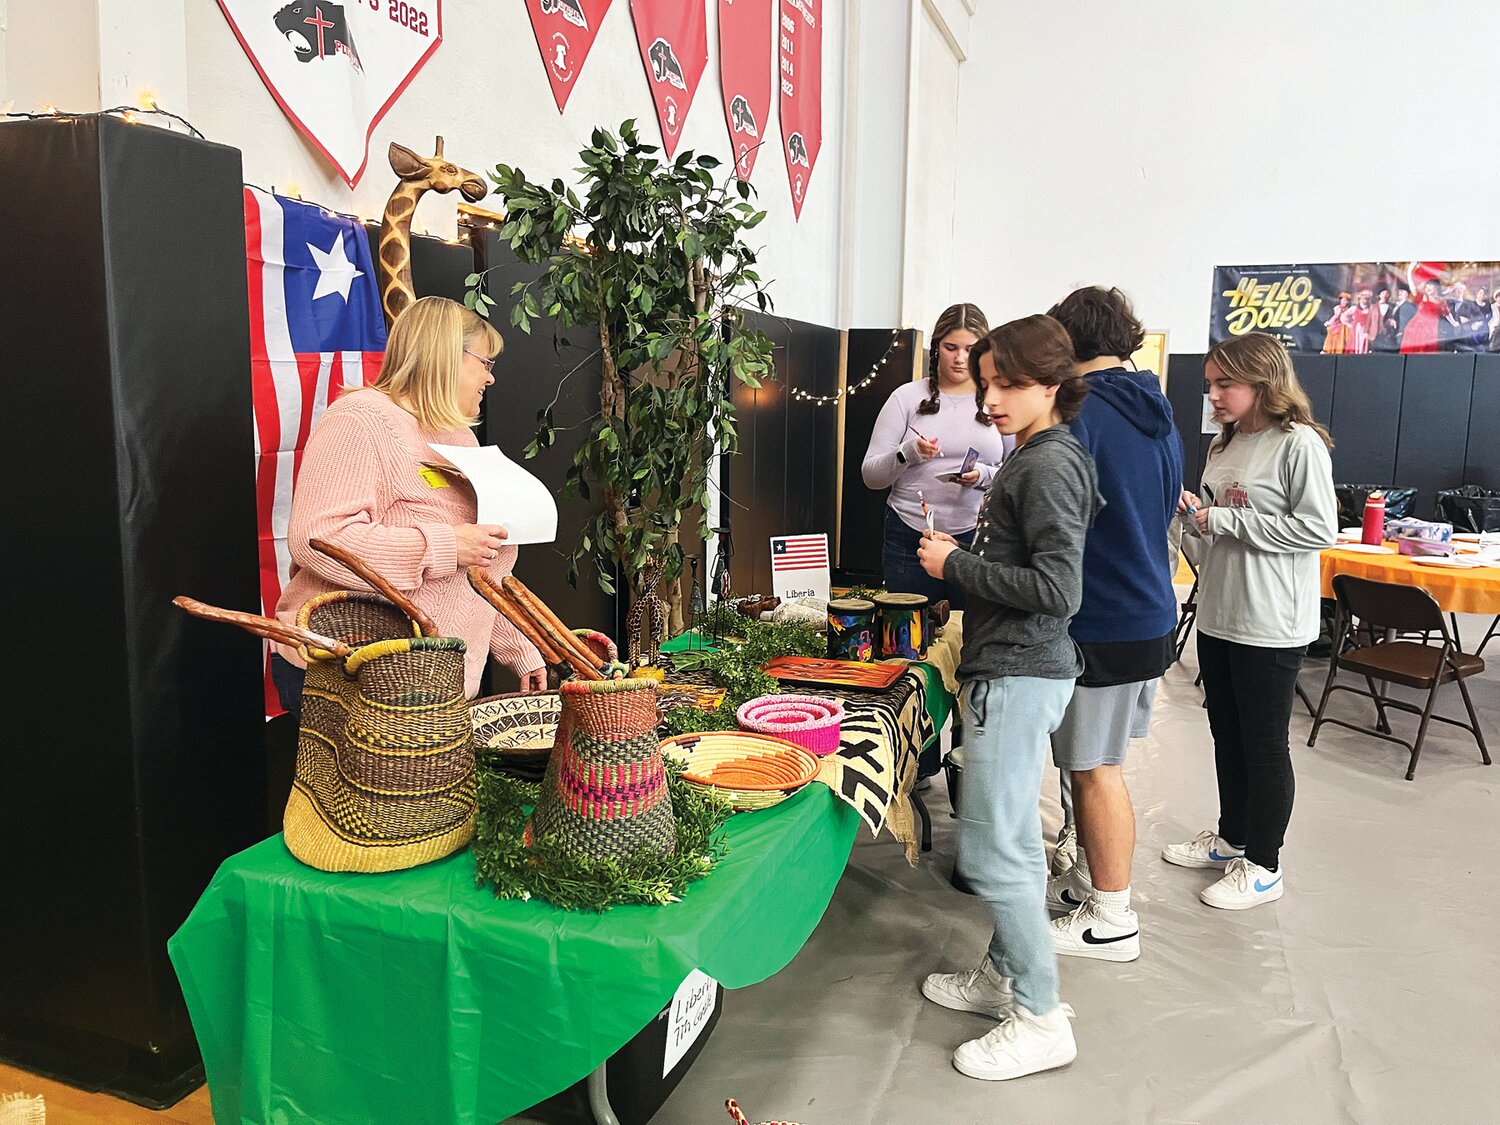 Plumstead Christian School students explore diverse cultures at its annual international festival last month.